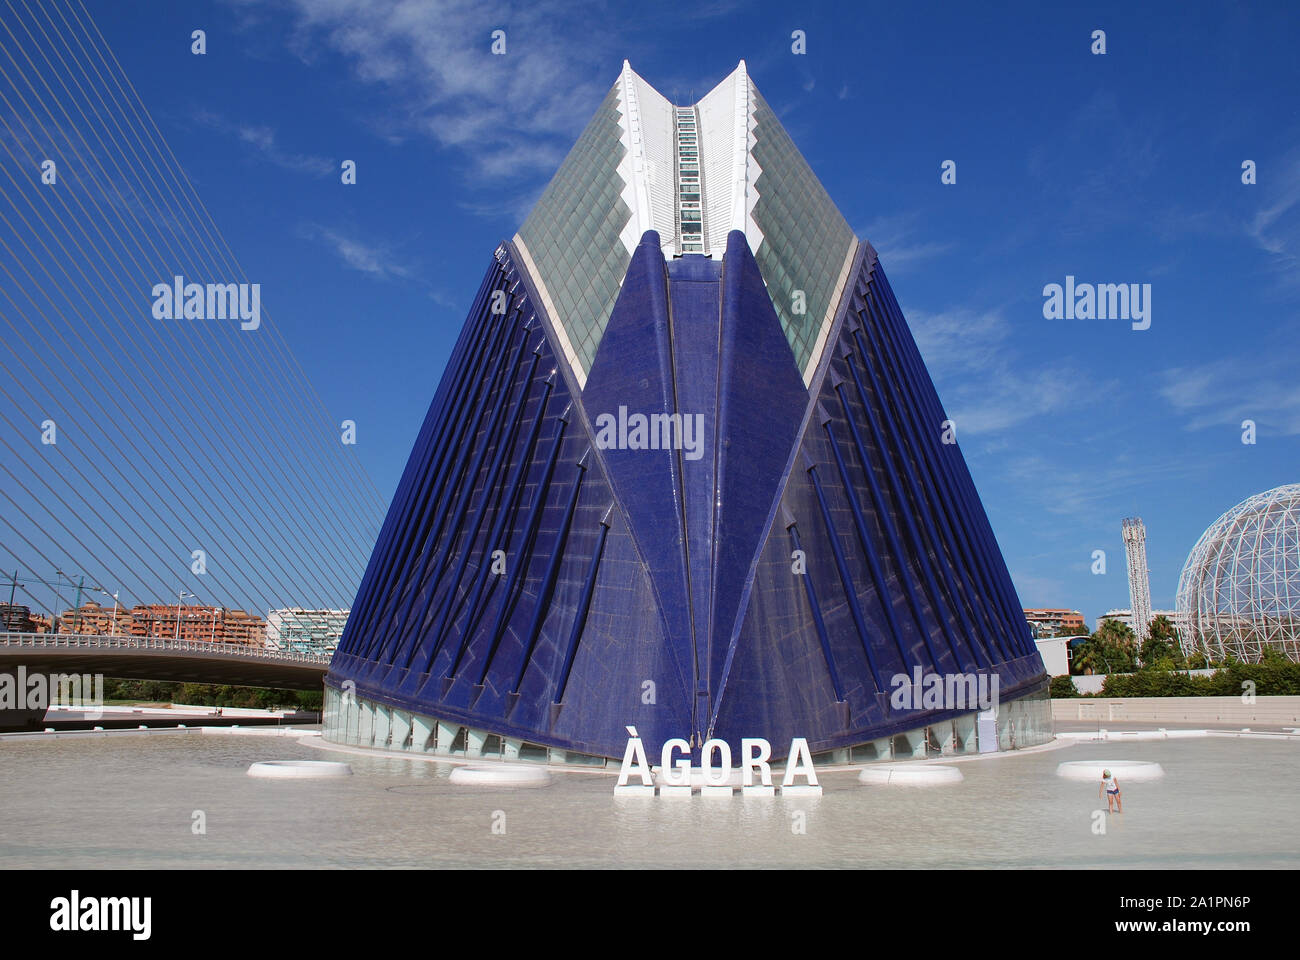 The Agora building at the City of Arts and Sciences in Valencia, Spain on September 5, 2019. Stock Photo